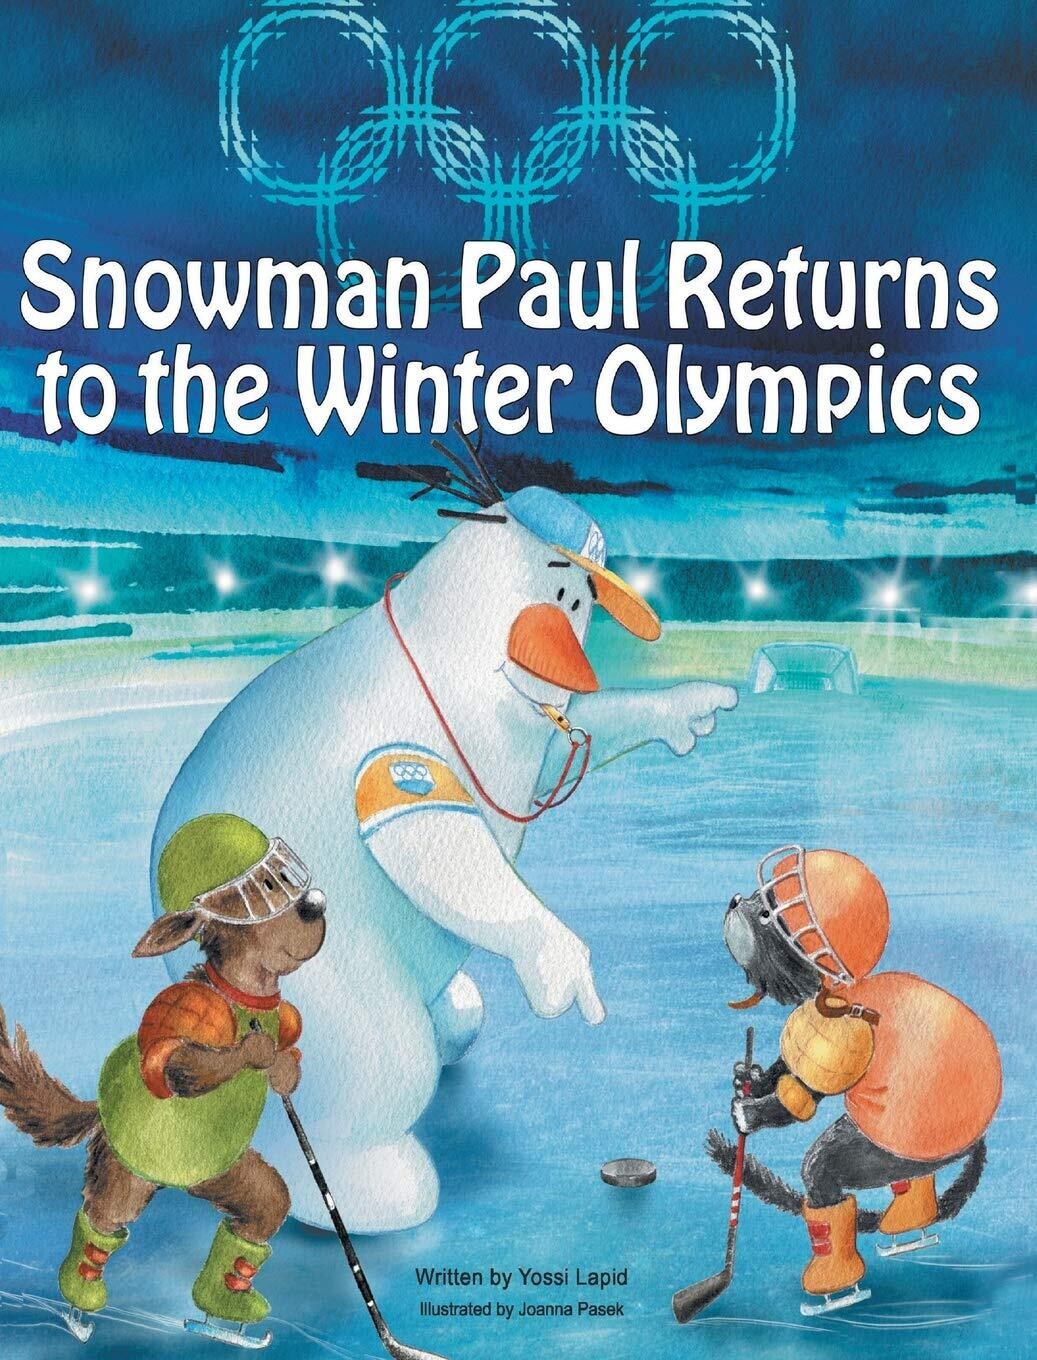 Snowman Paul Returns to the Winter Olympics (Paperback) - by Yossi Lapid